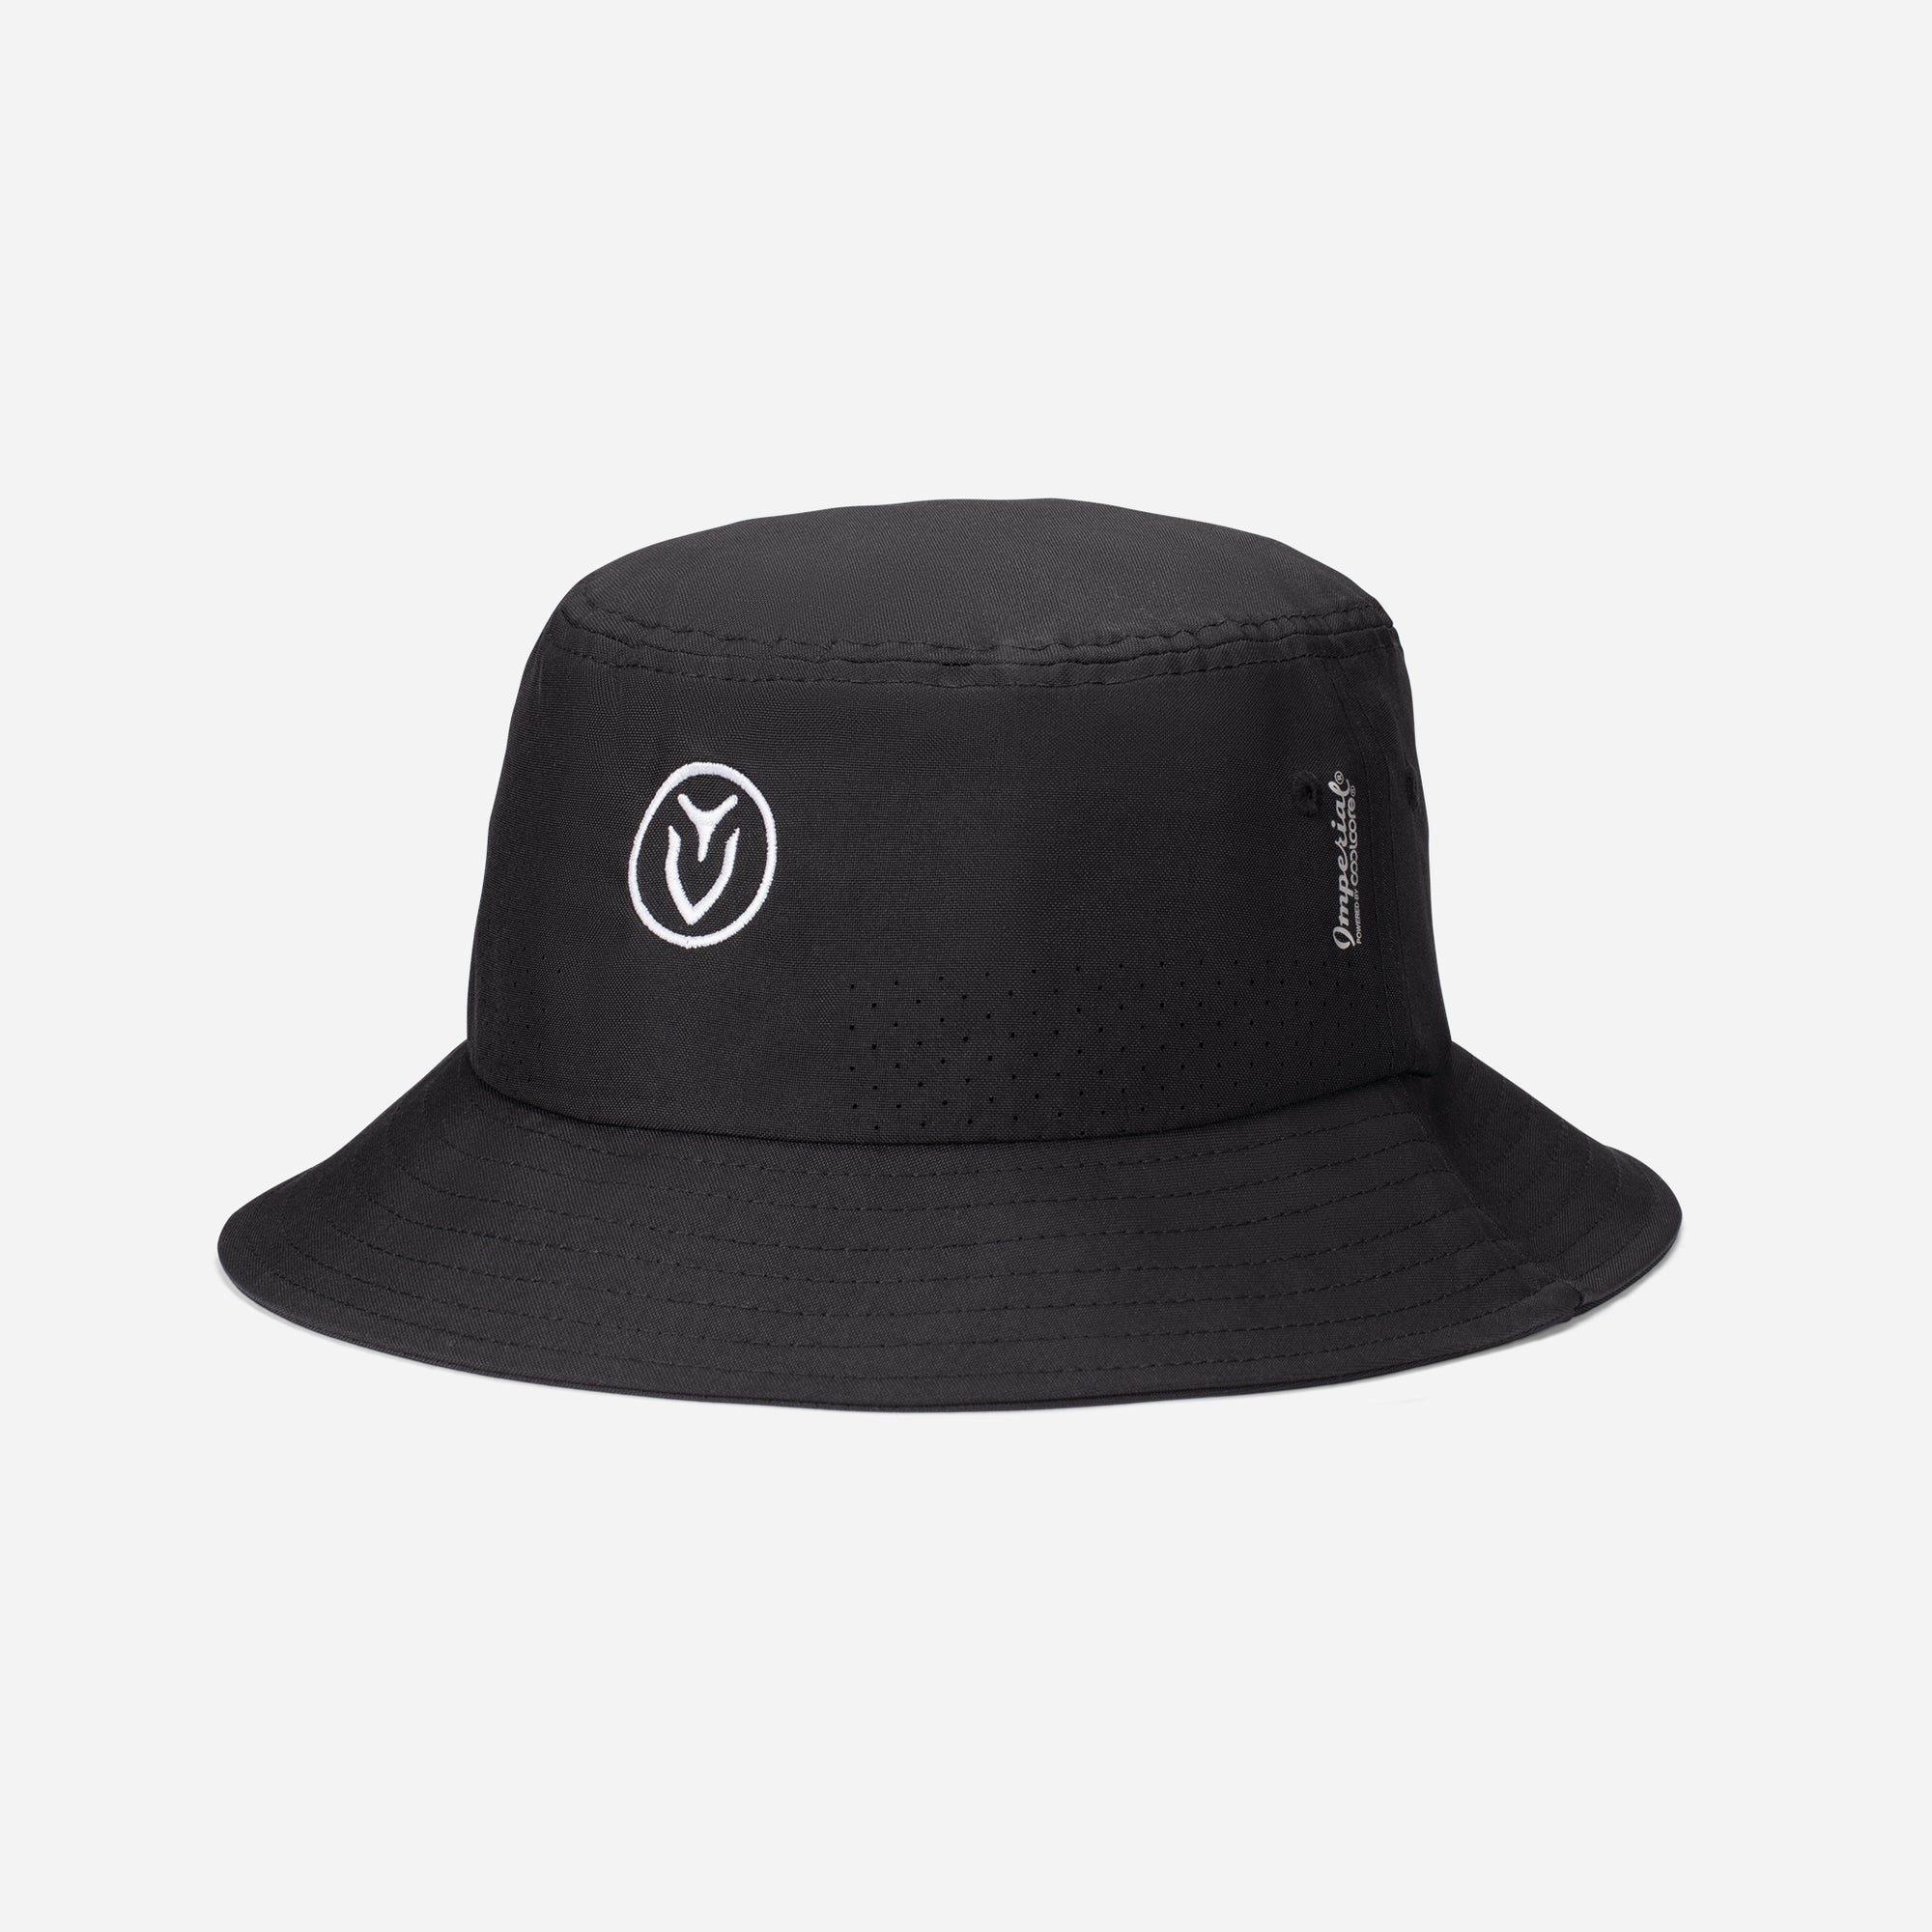 VESSEL Cooling Sun-Protection Bucket Hat